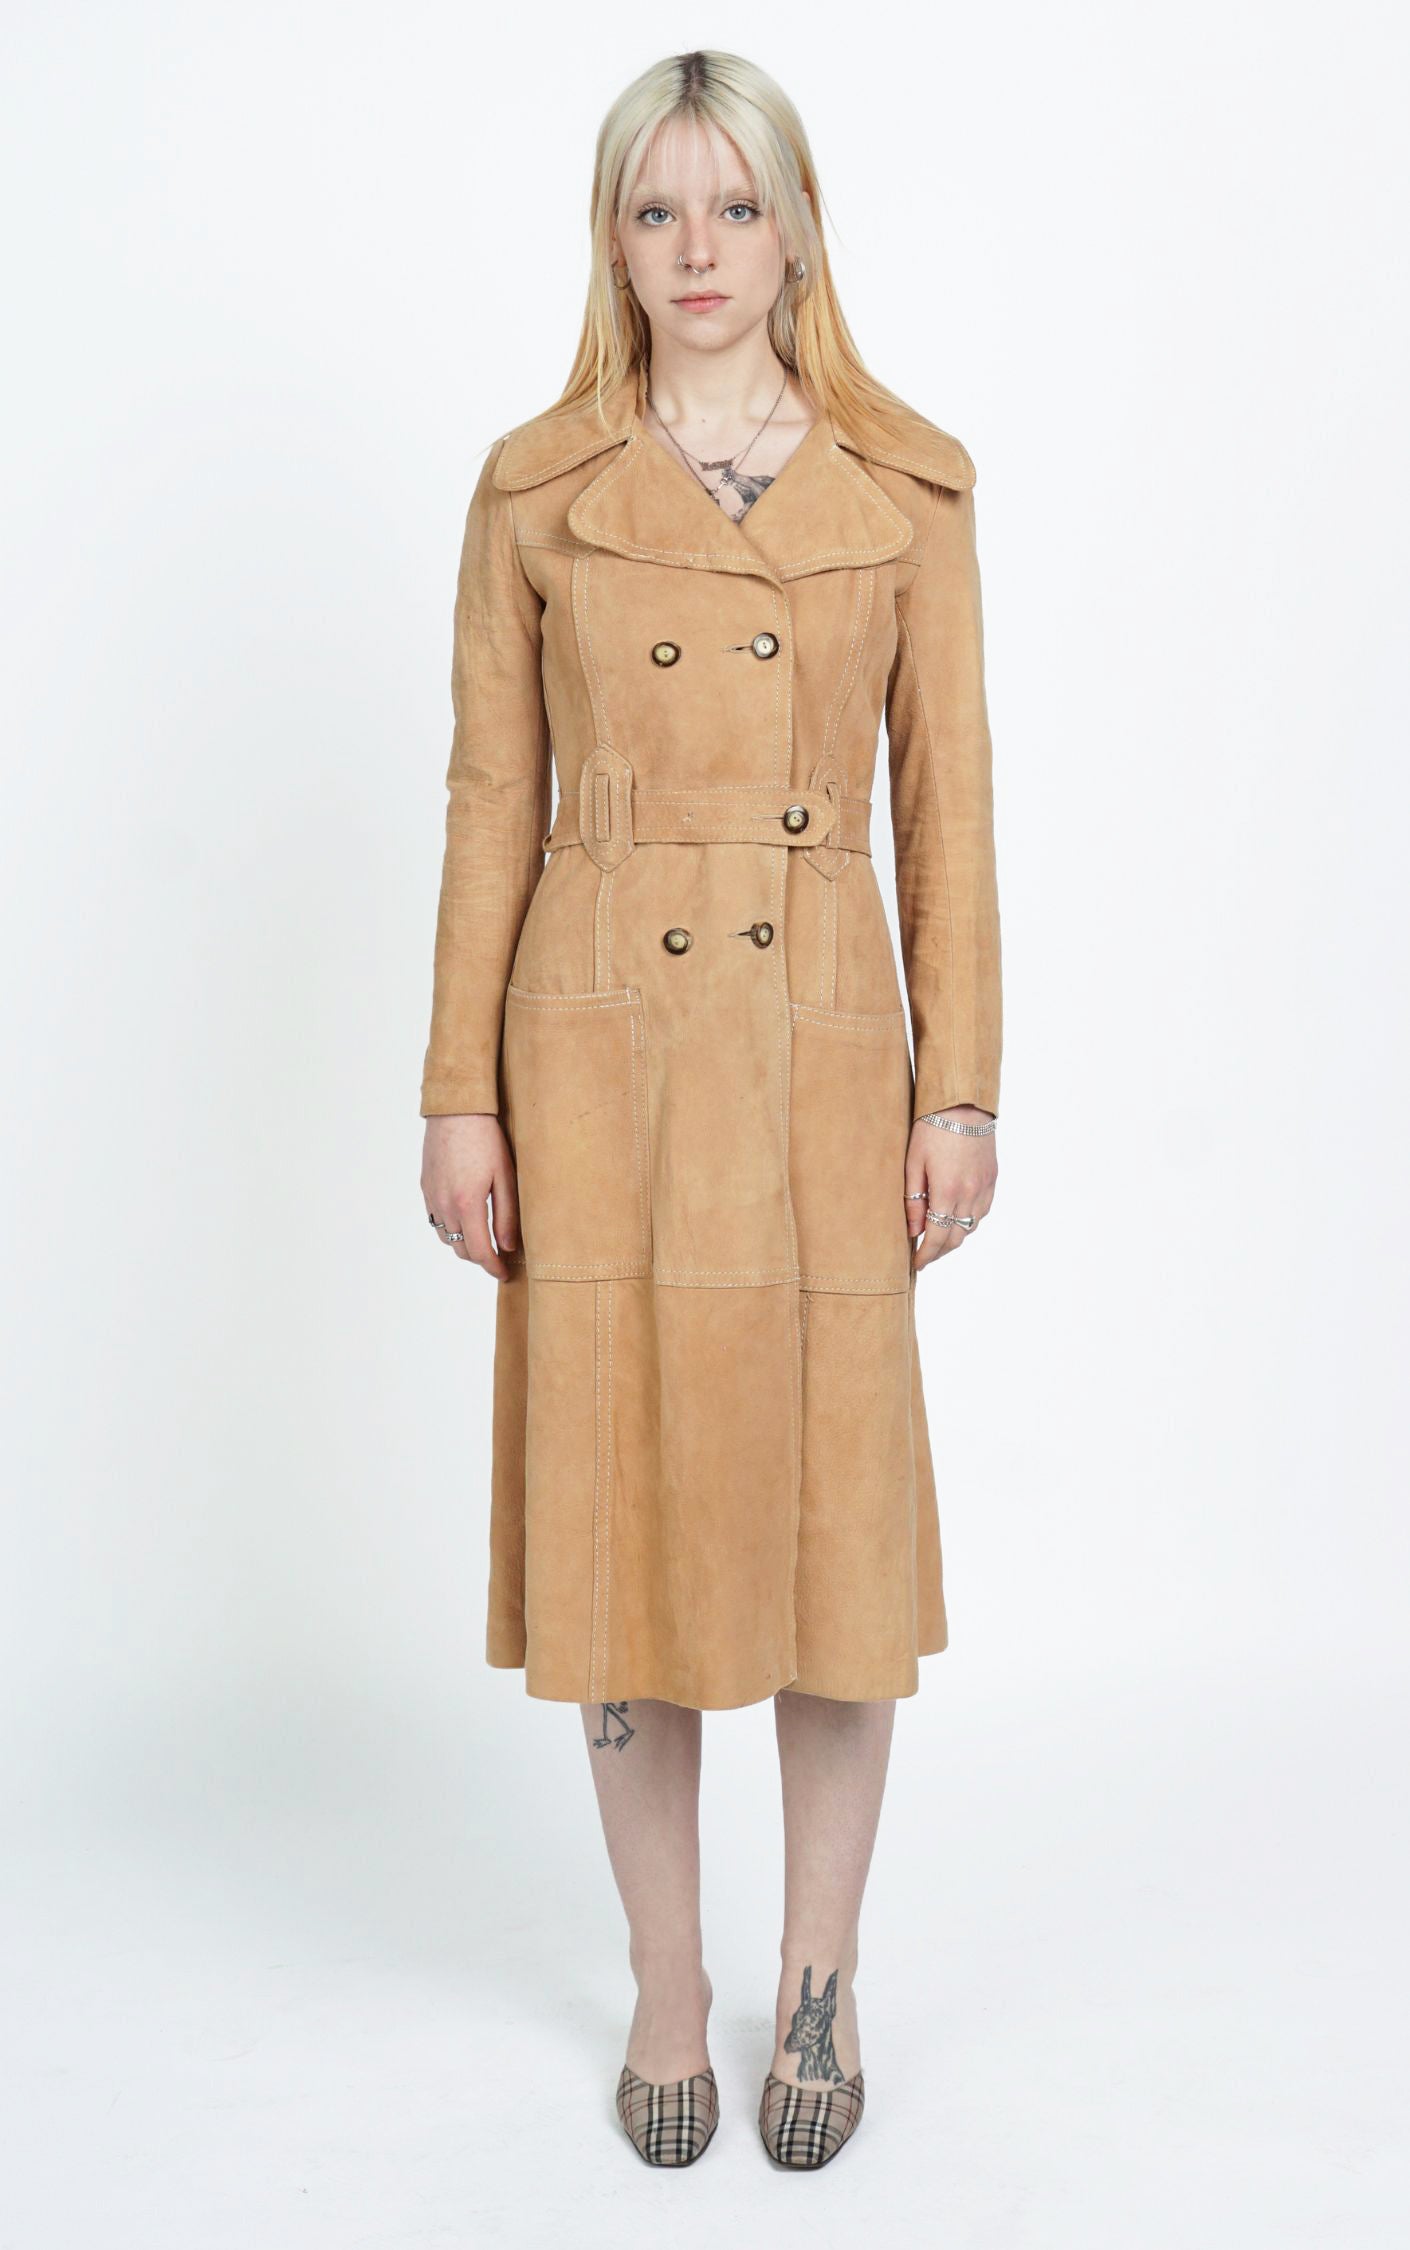 VINTAGE 60s Camel Suede Leather Belted Coat resellum